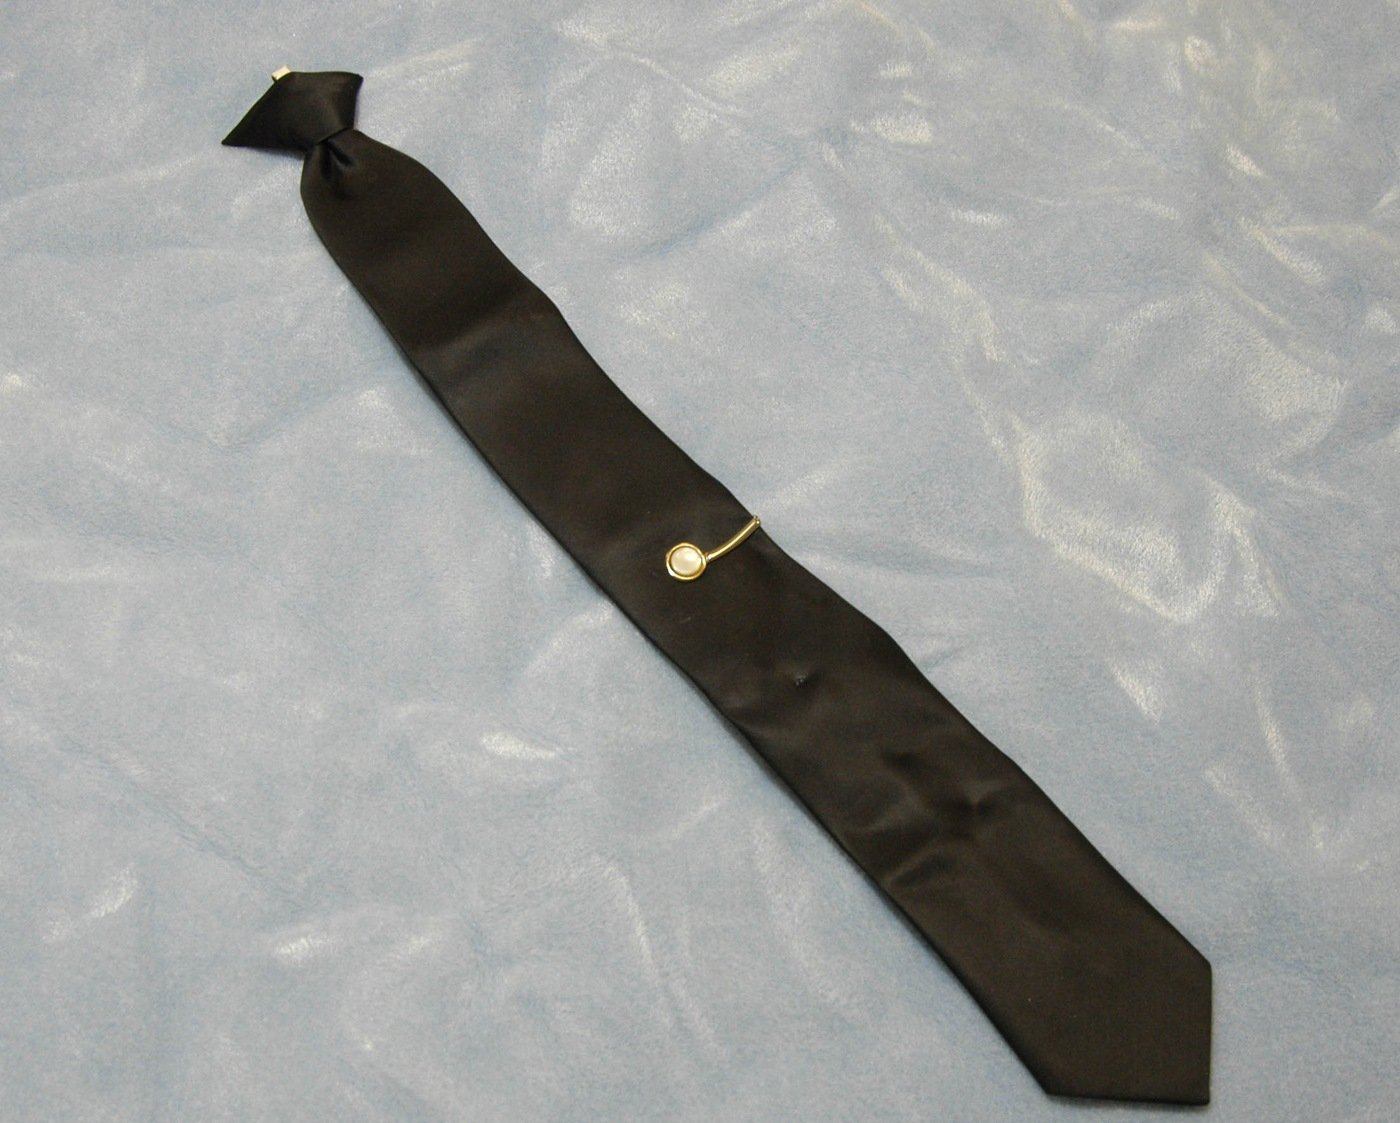 During the hijacking, Cooper was wearing this black J.C. Penney tie, which he removed before jumping; it later provided us with a DNA sample.